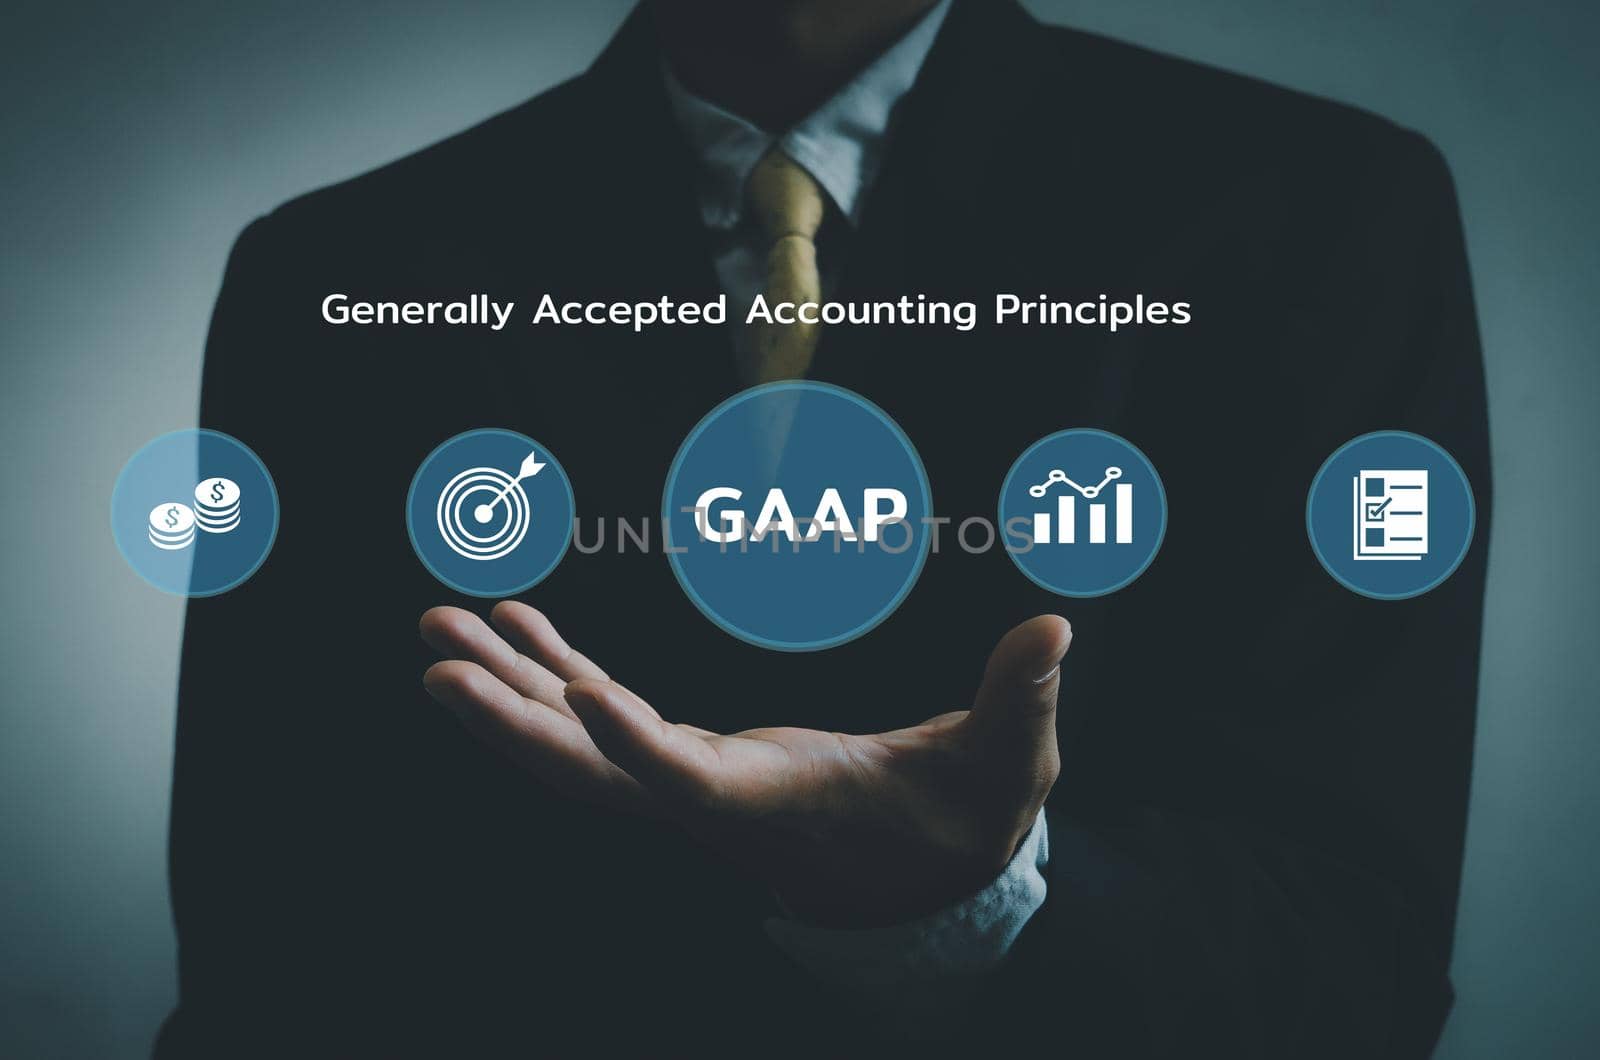 Hand businessman icon GAAP Generally Accepted Accounting Principles  virtual screen.Business financial Concept.